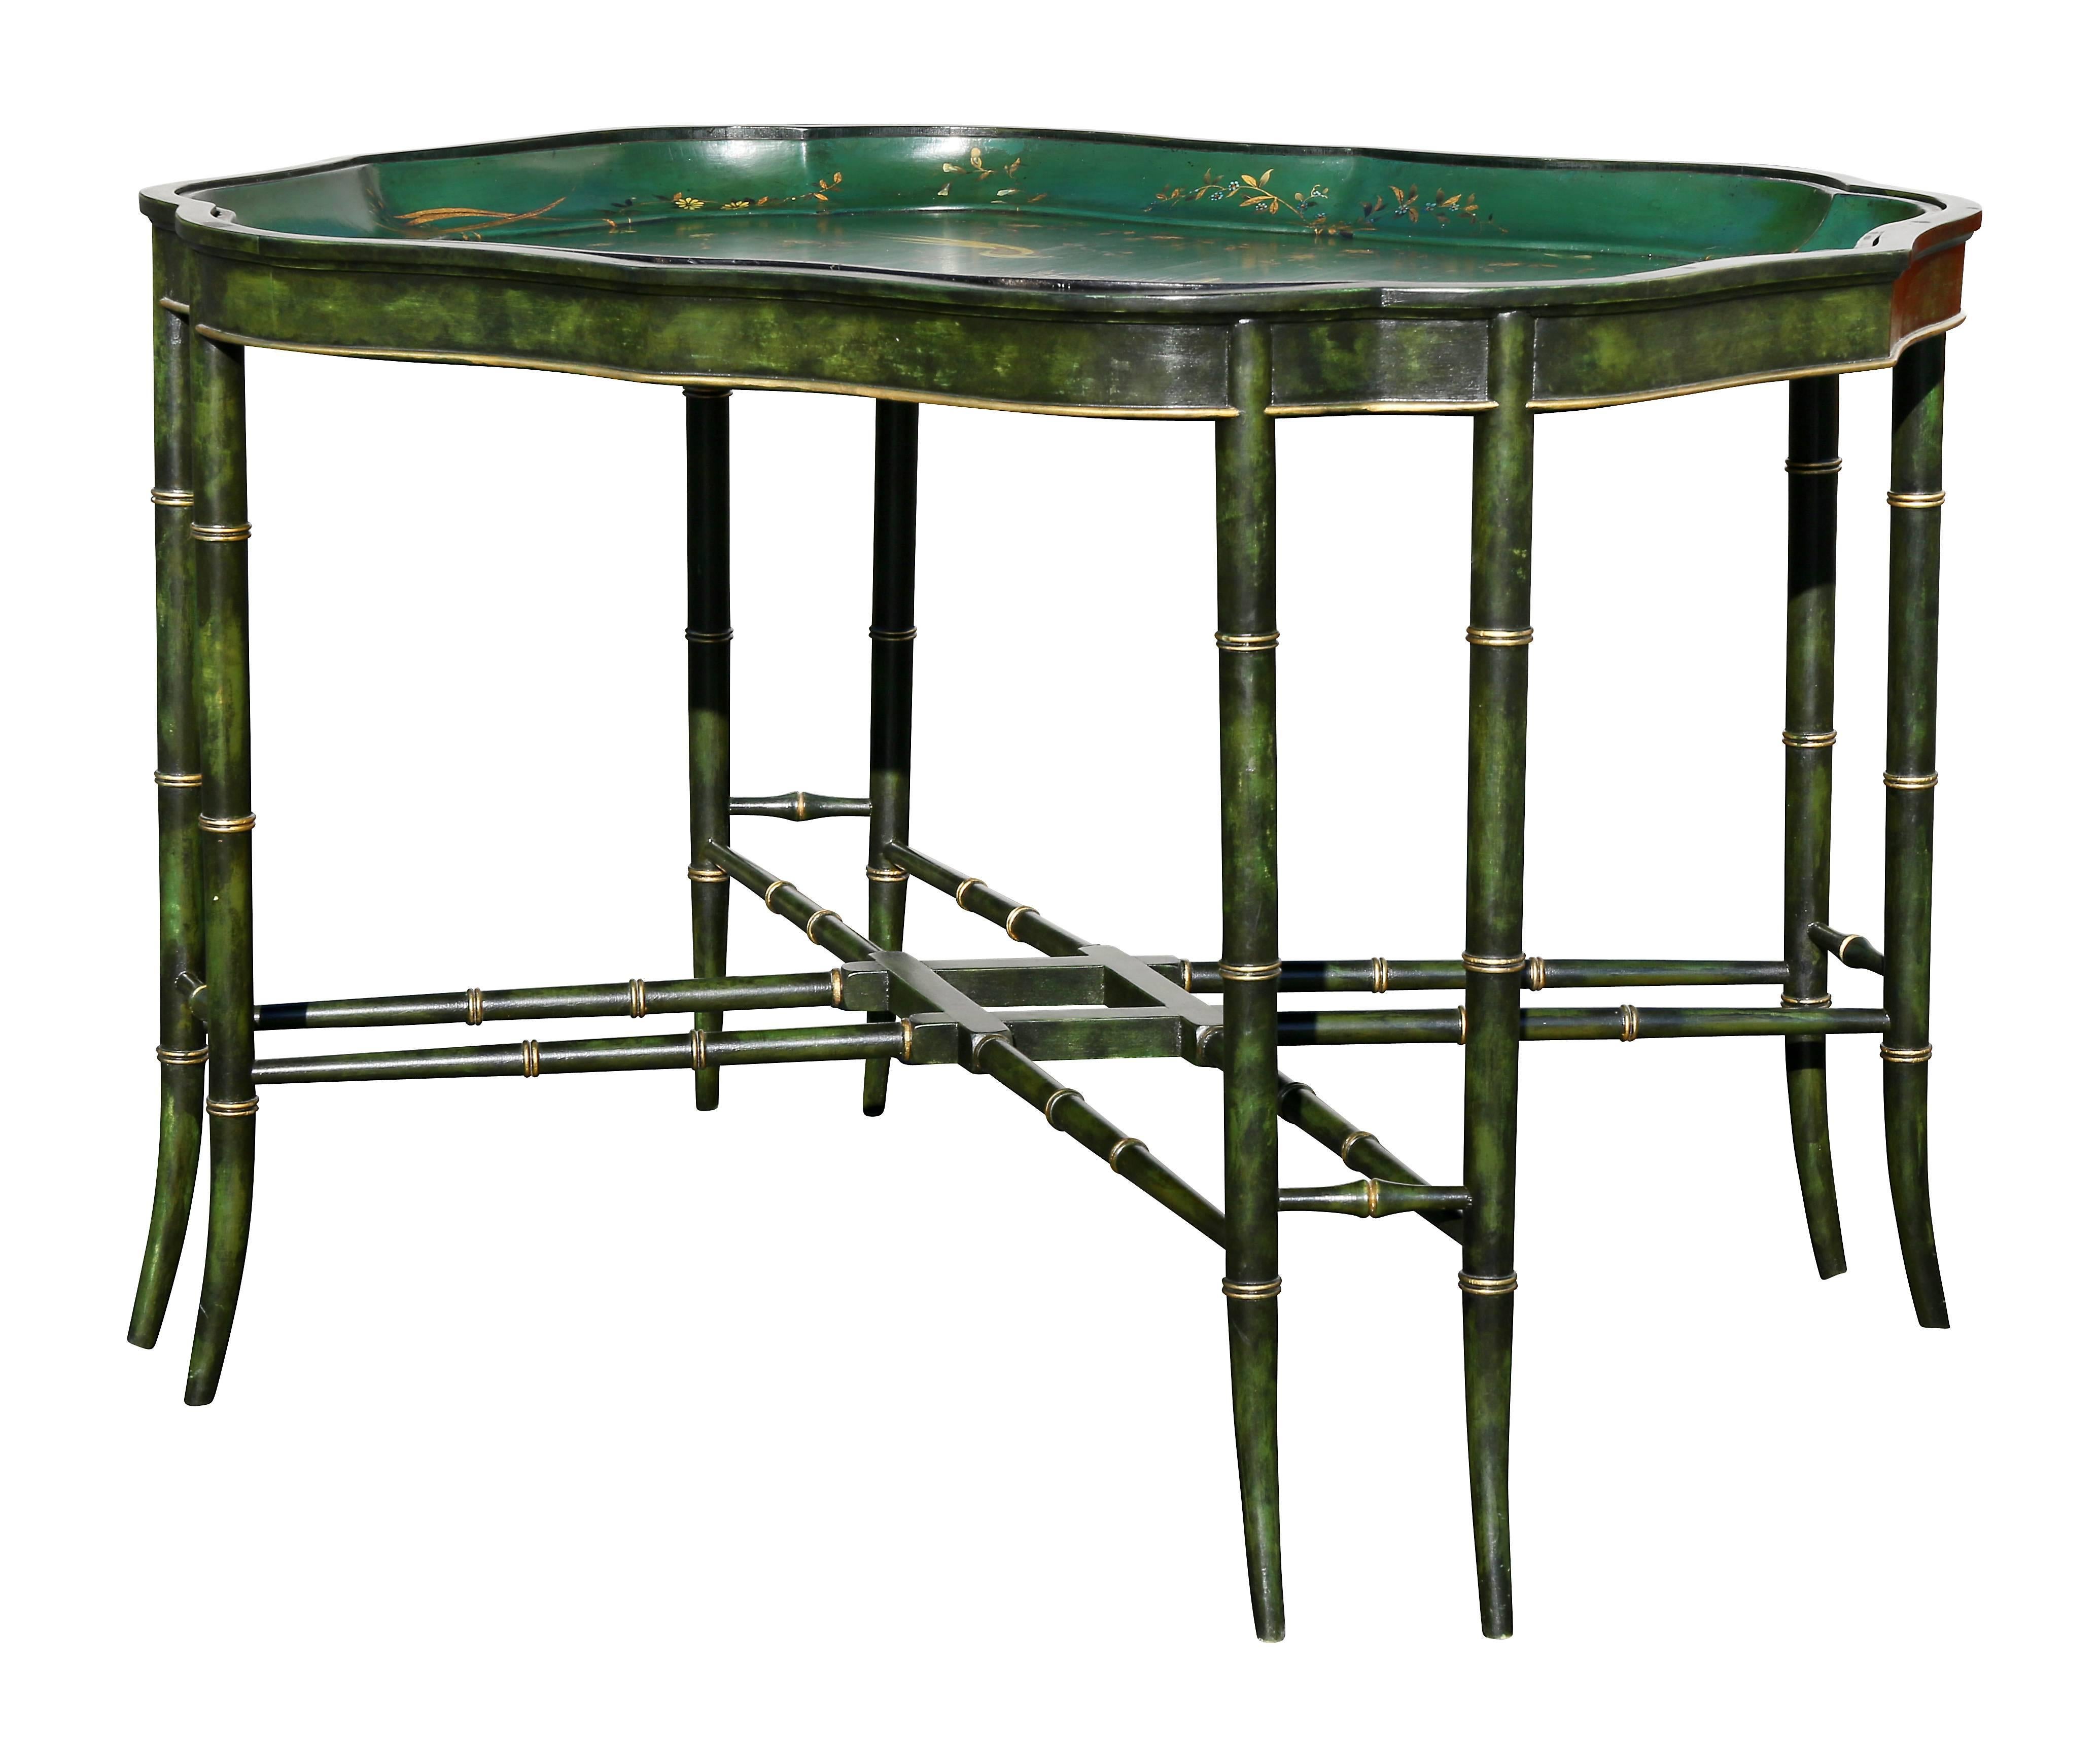 Shaped oval scalloped top decorated with birds and branches with later bamboo turned base.